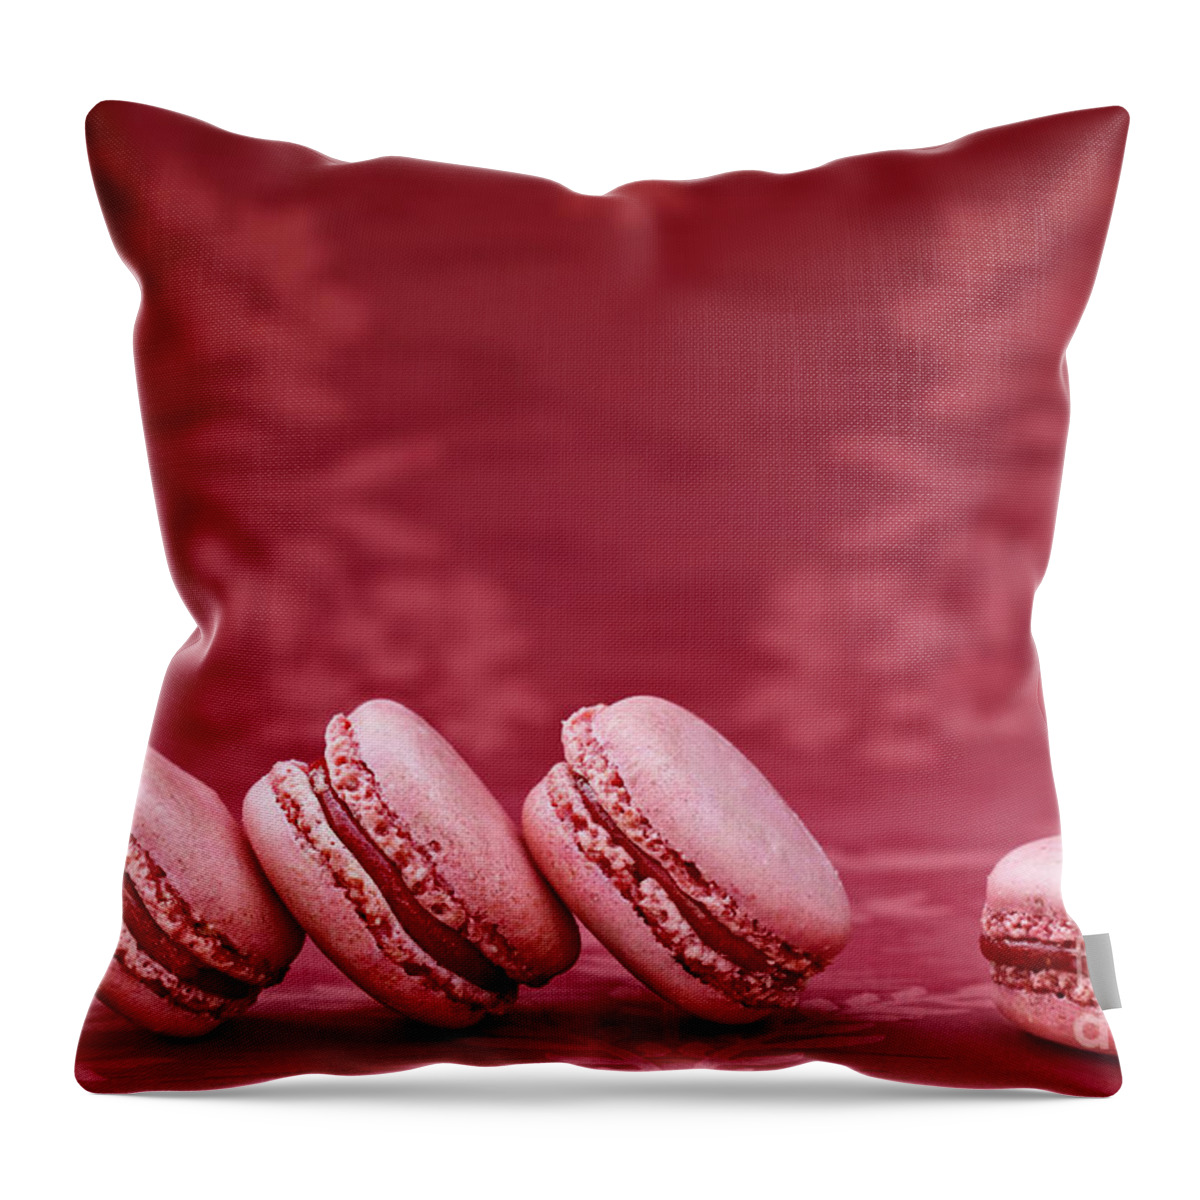 Macaron Throw Pillow featuring the photograph Strawberry Macarons by Stephanie Frey